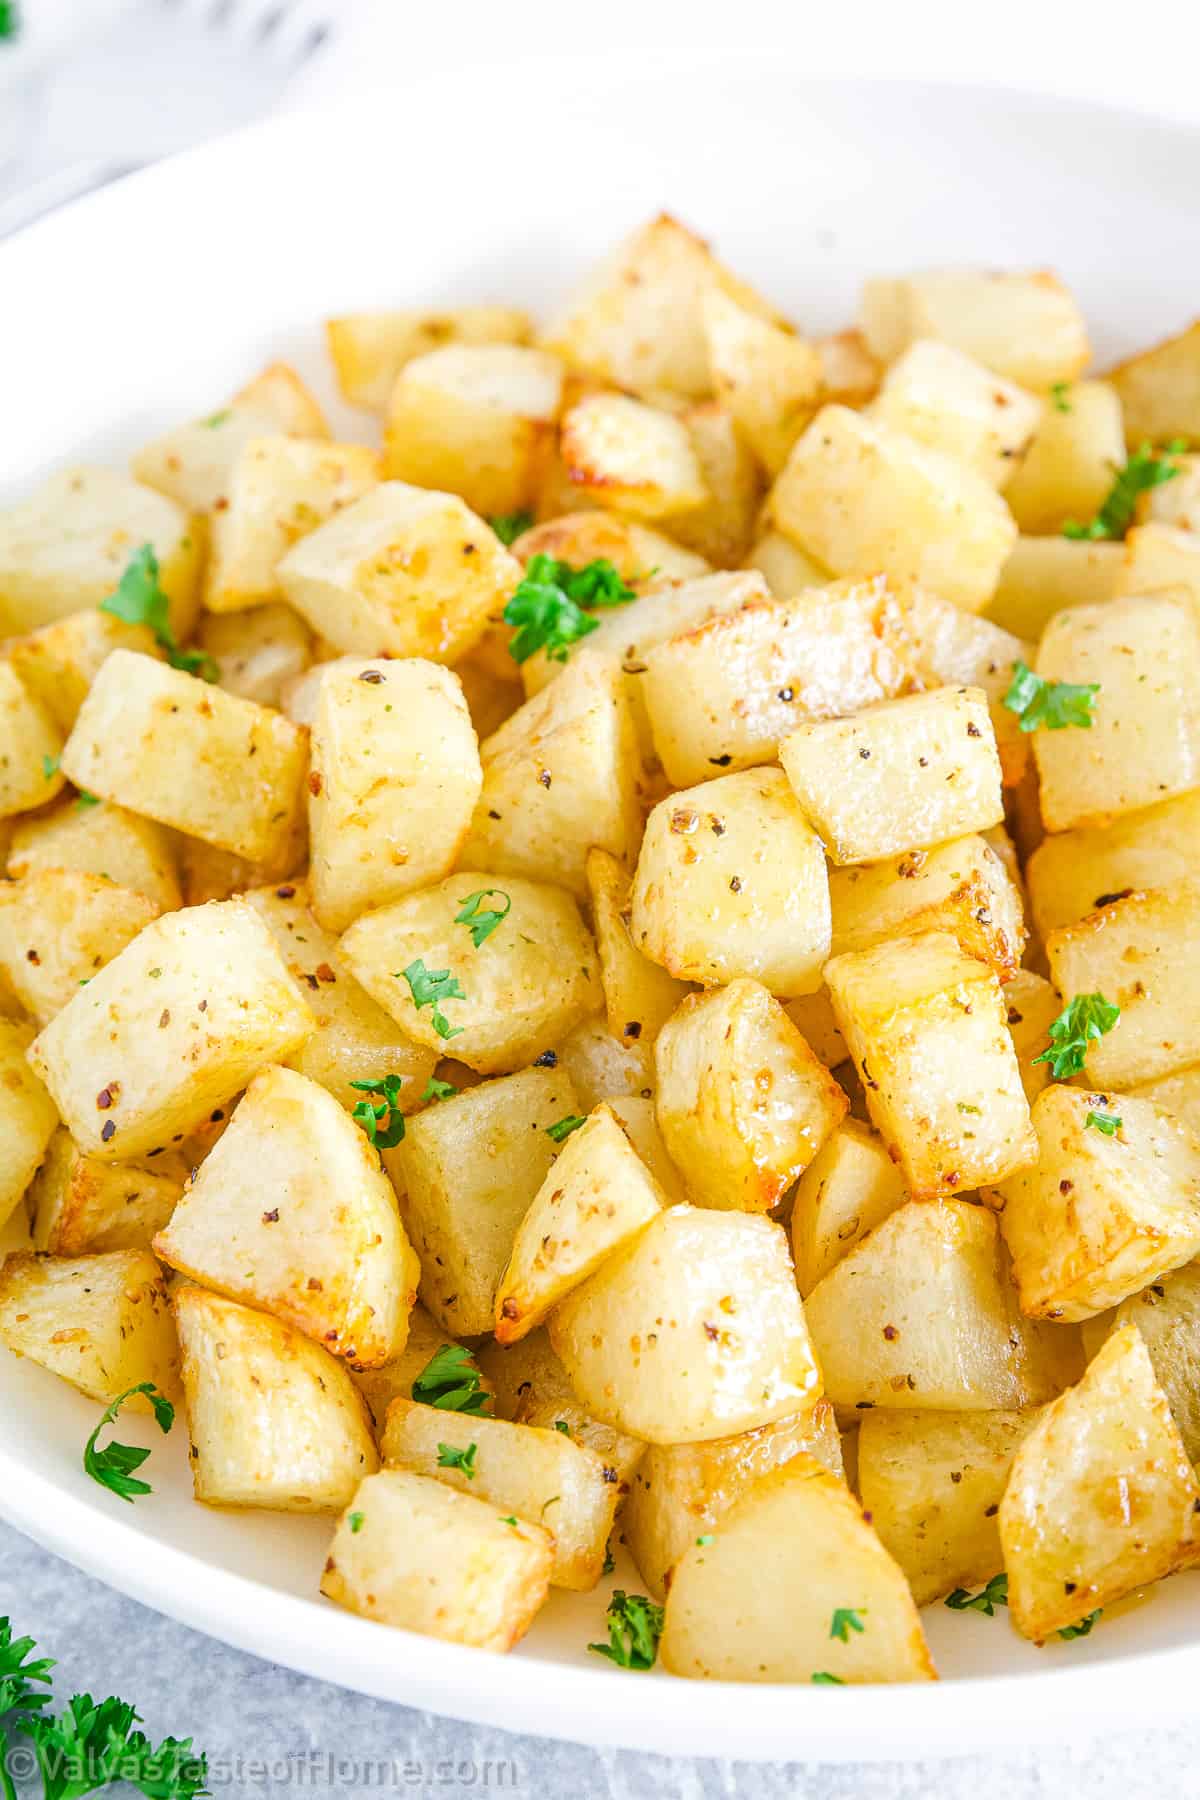 The combination of garlic salt, onion salt, and Mrs. Dash seasoning gives these potatoes a delicious savory flavor.